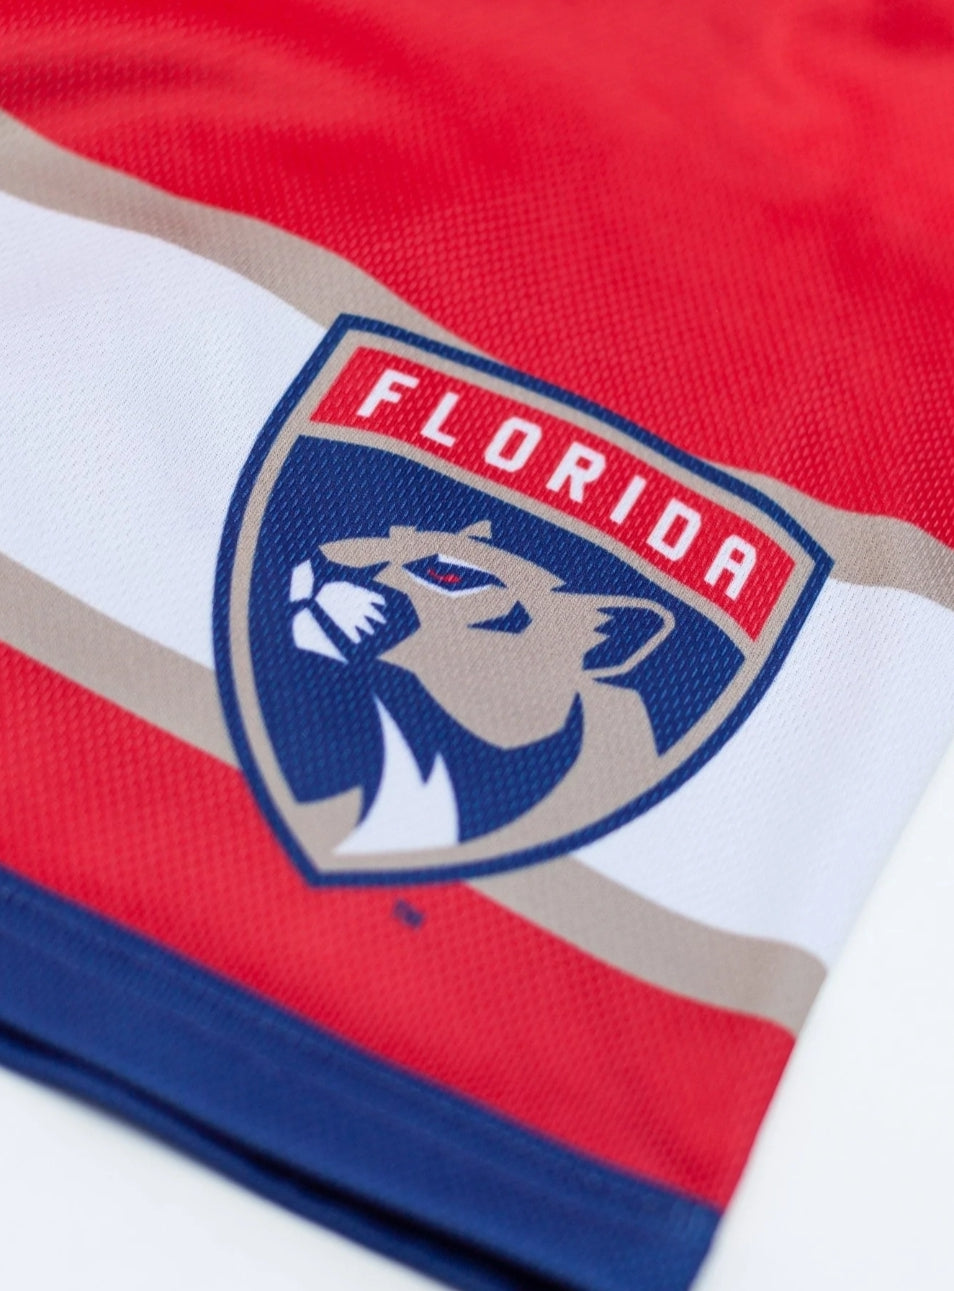 Florida Panthers Bench Clearers Mesh Hockey Shorts - Red